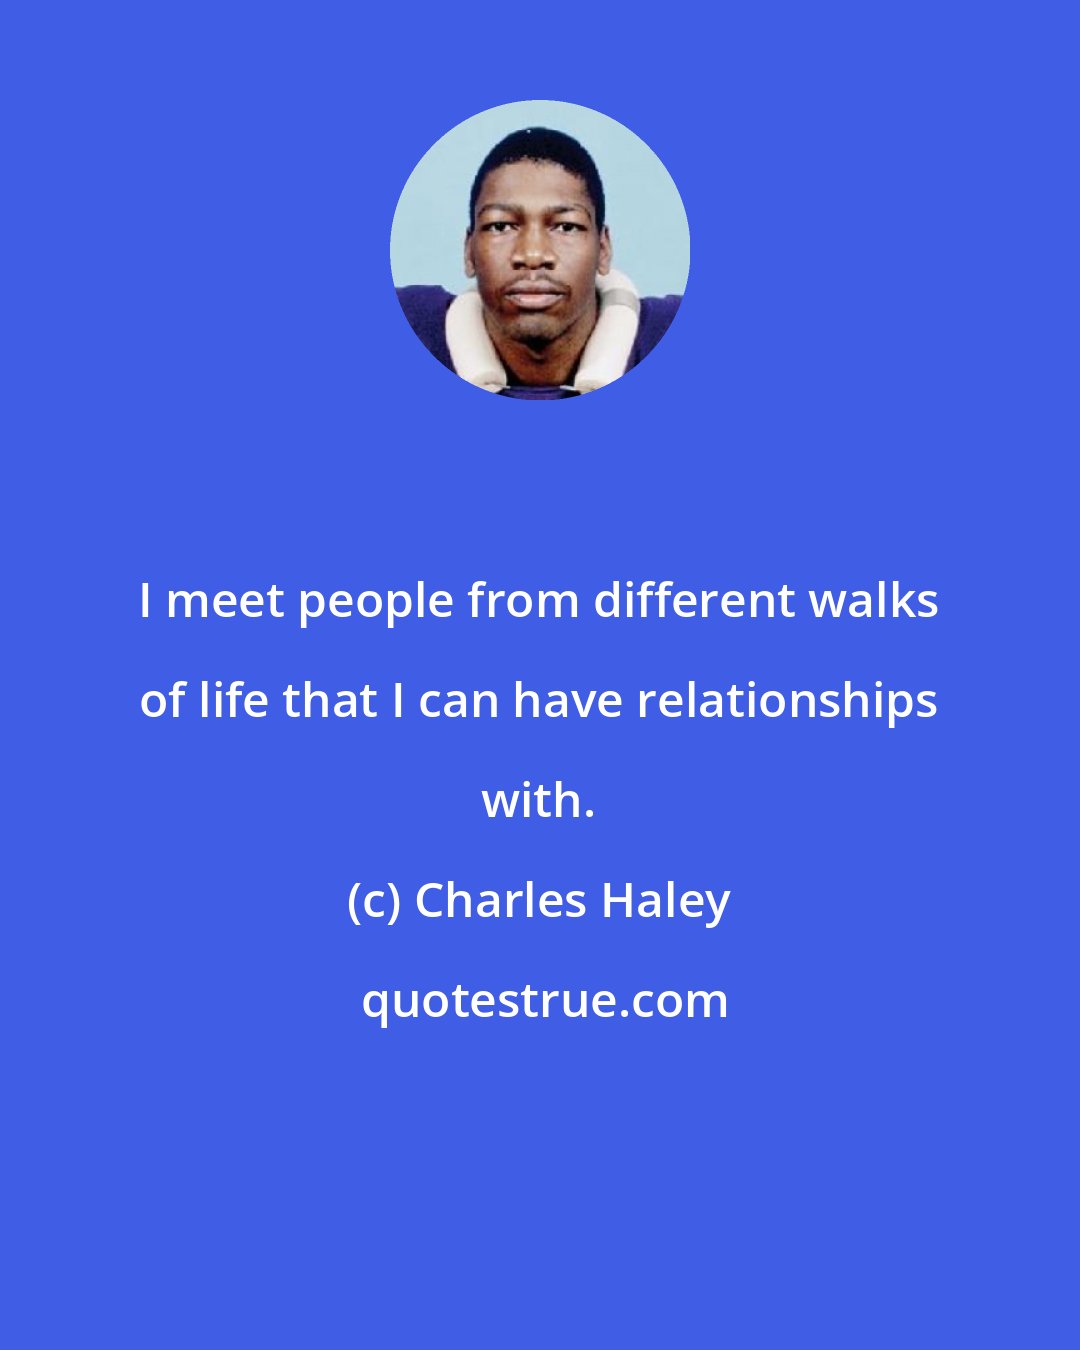 Charles Haley: I meet people from different walks of life that I can have relationships with.